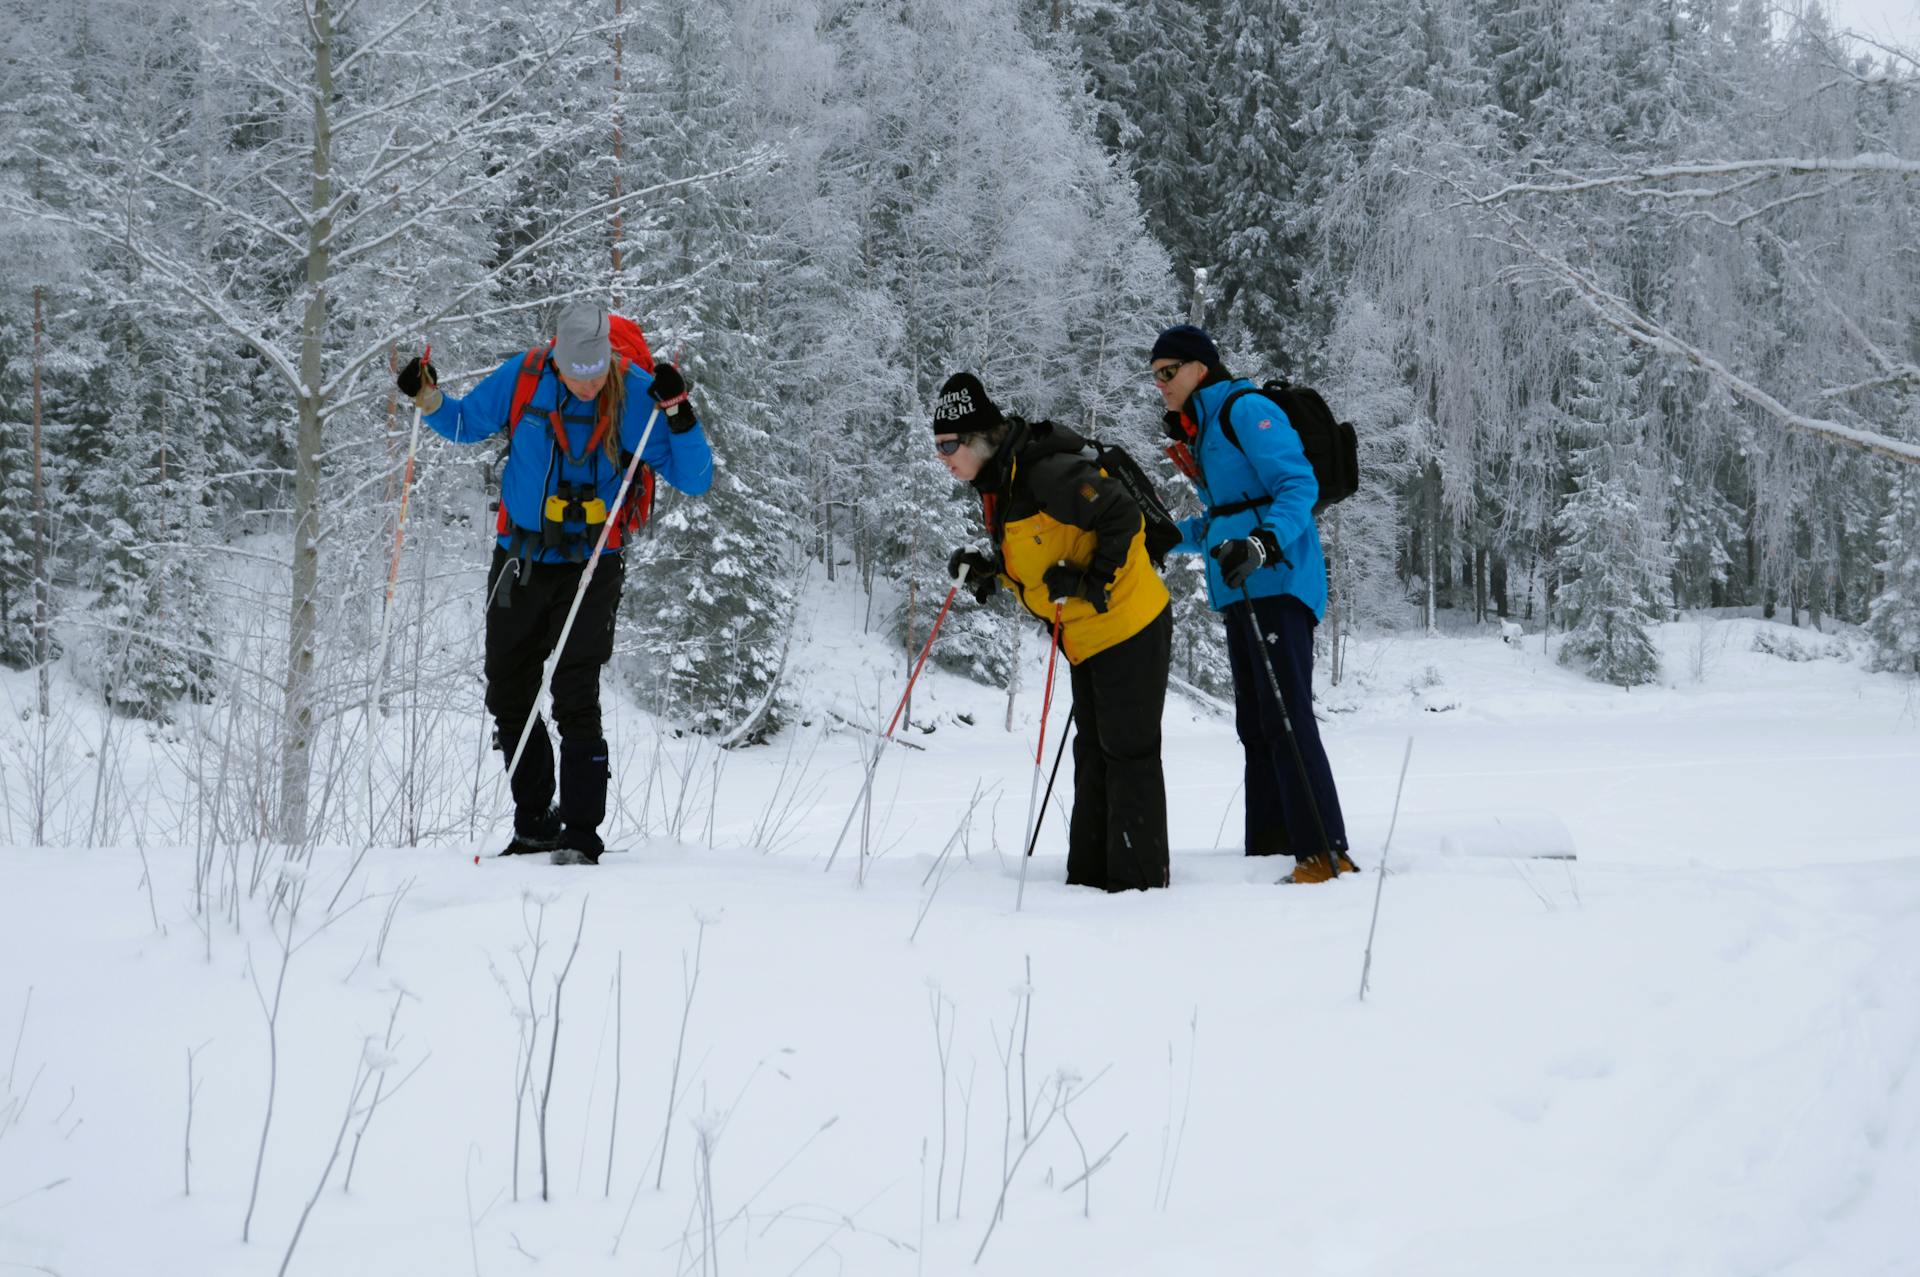 Participants are examining wolf tracks during a guided wolf tracking tour in the Malingsbo-Kloten Nature Reserve in Sweden.